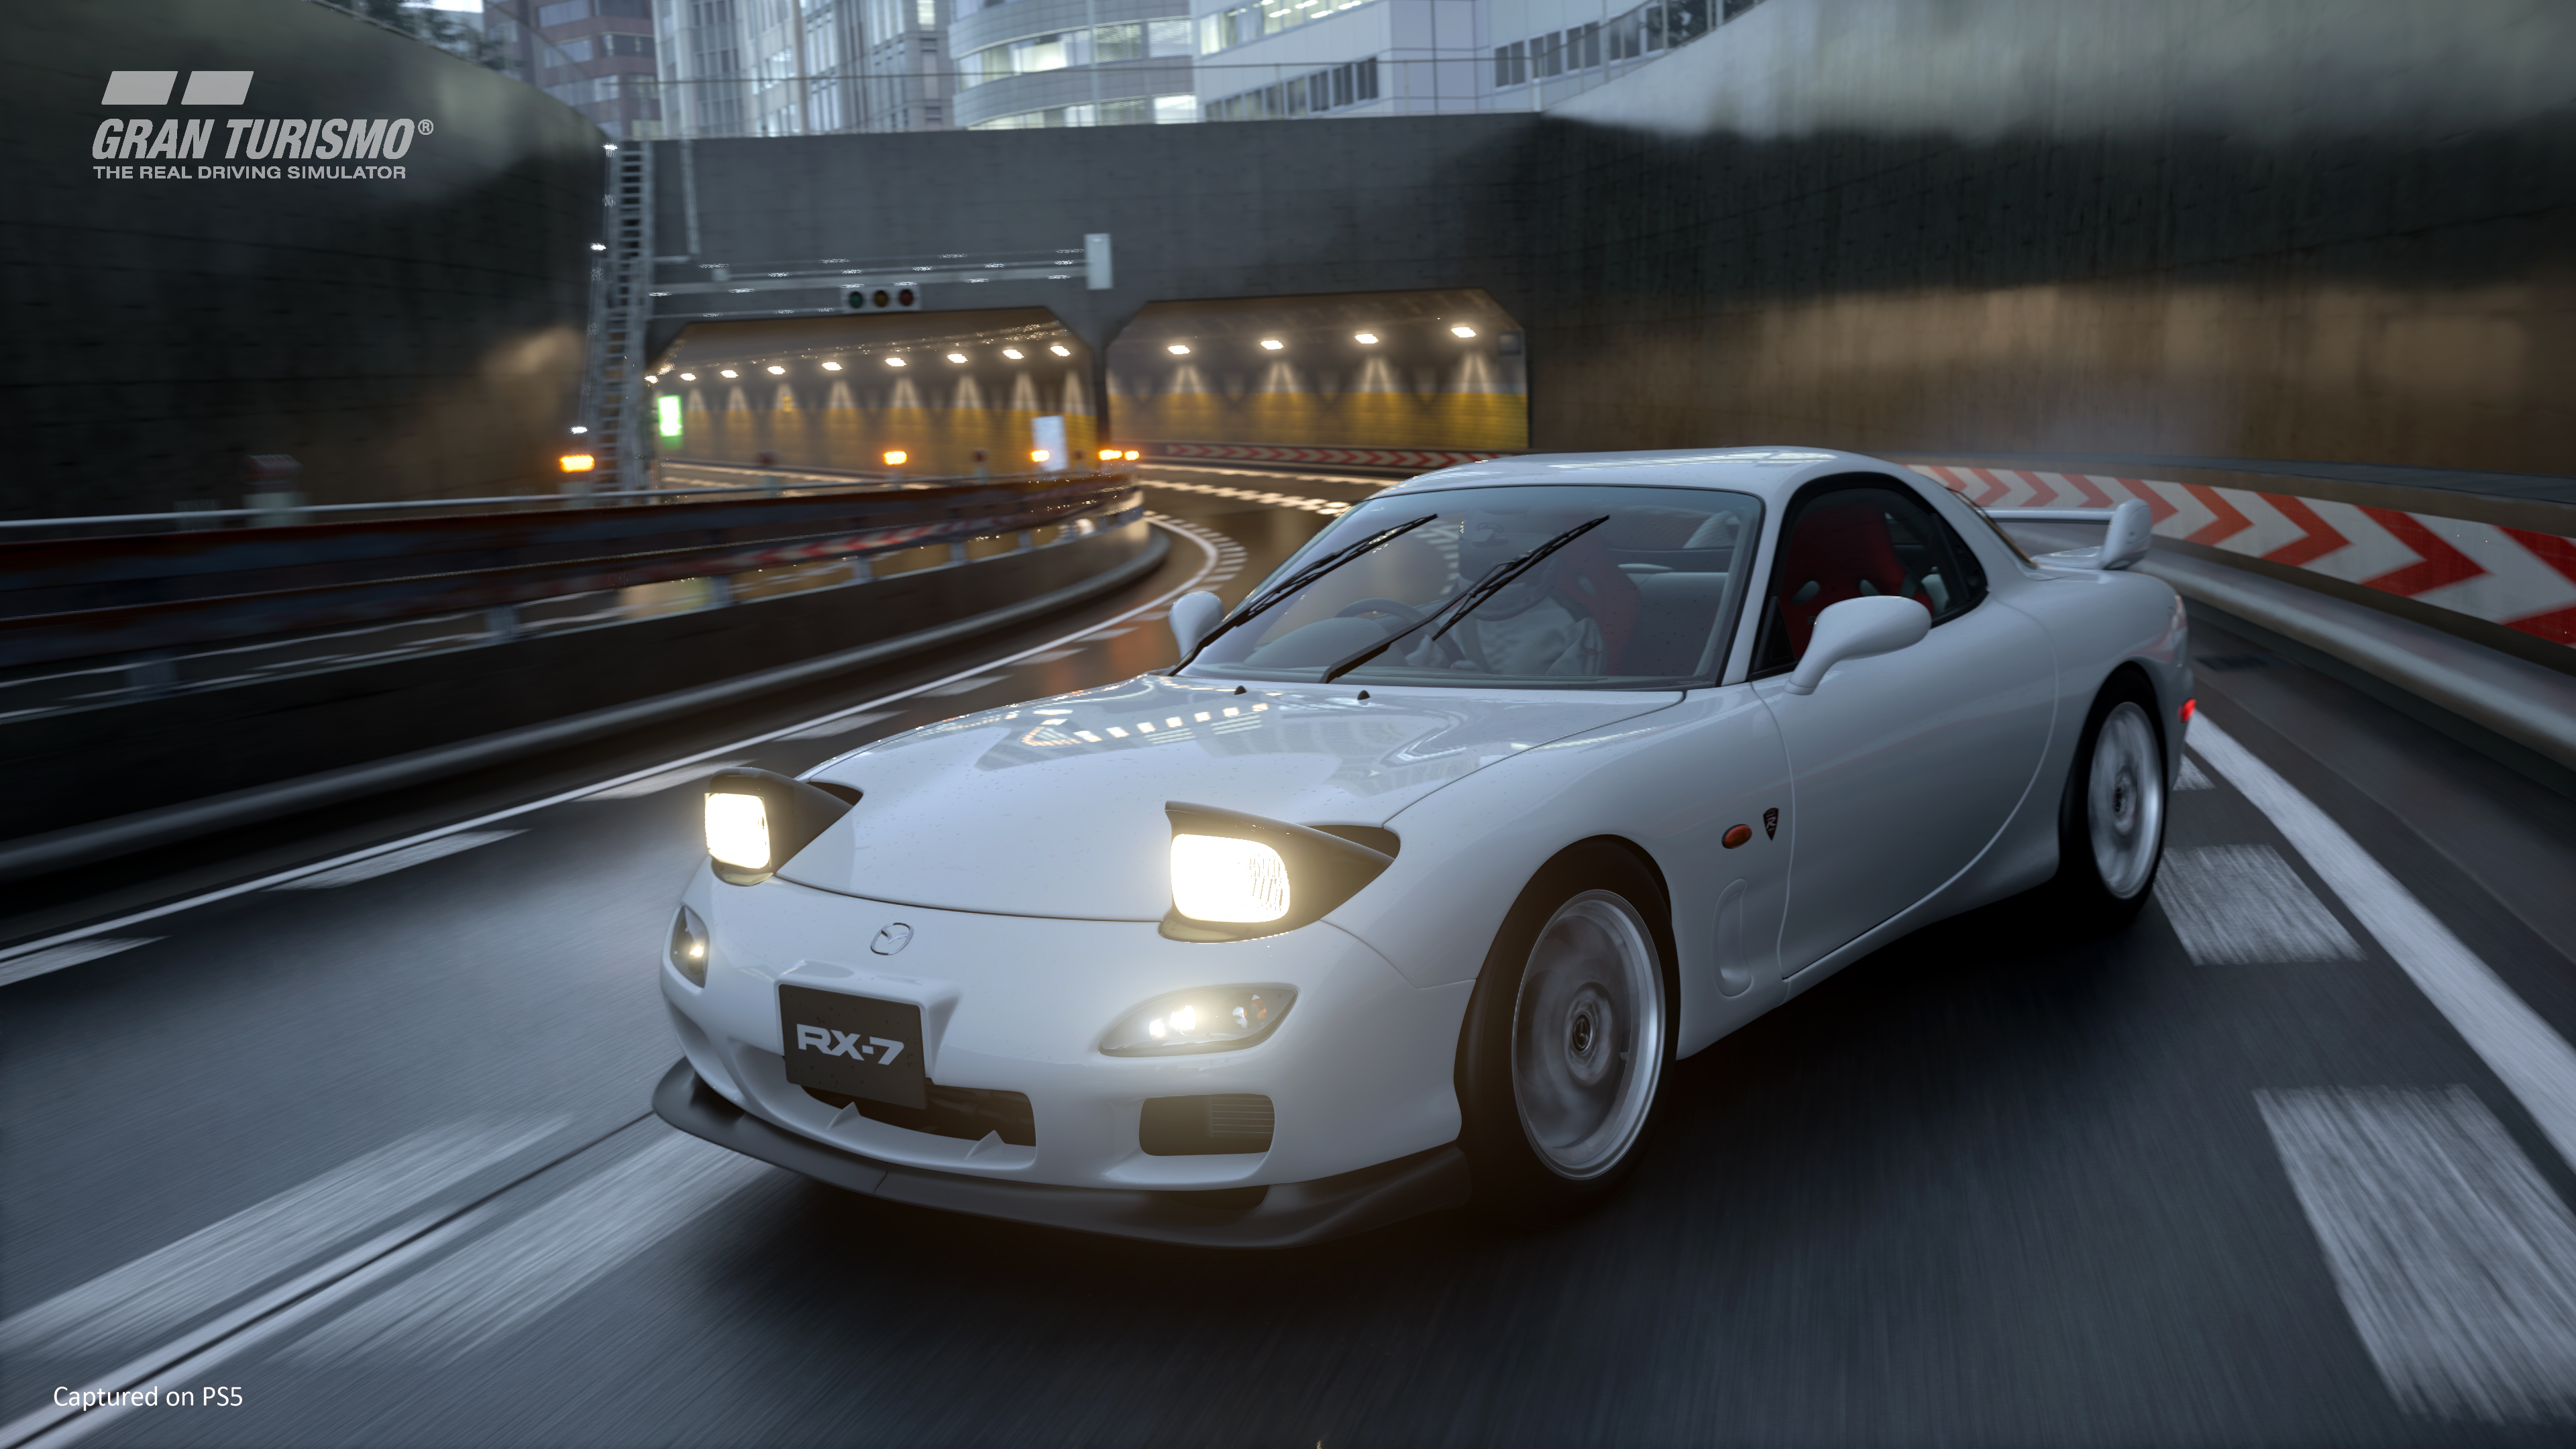 Gran Turismo 7 PS5, PS4 Has 'Really High' Number of Players